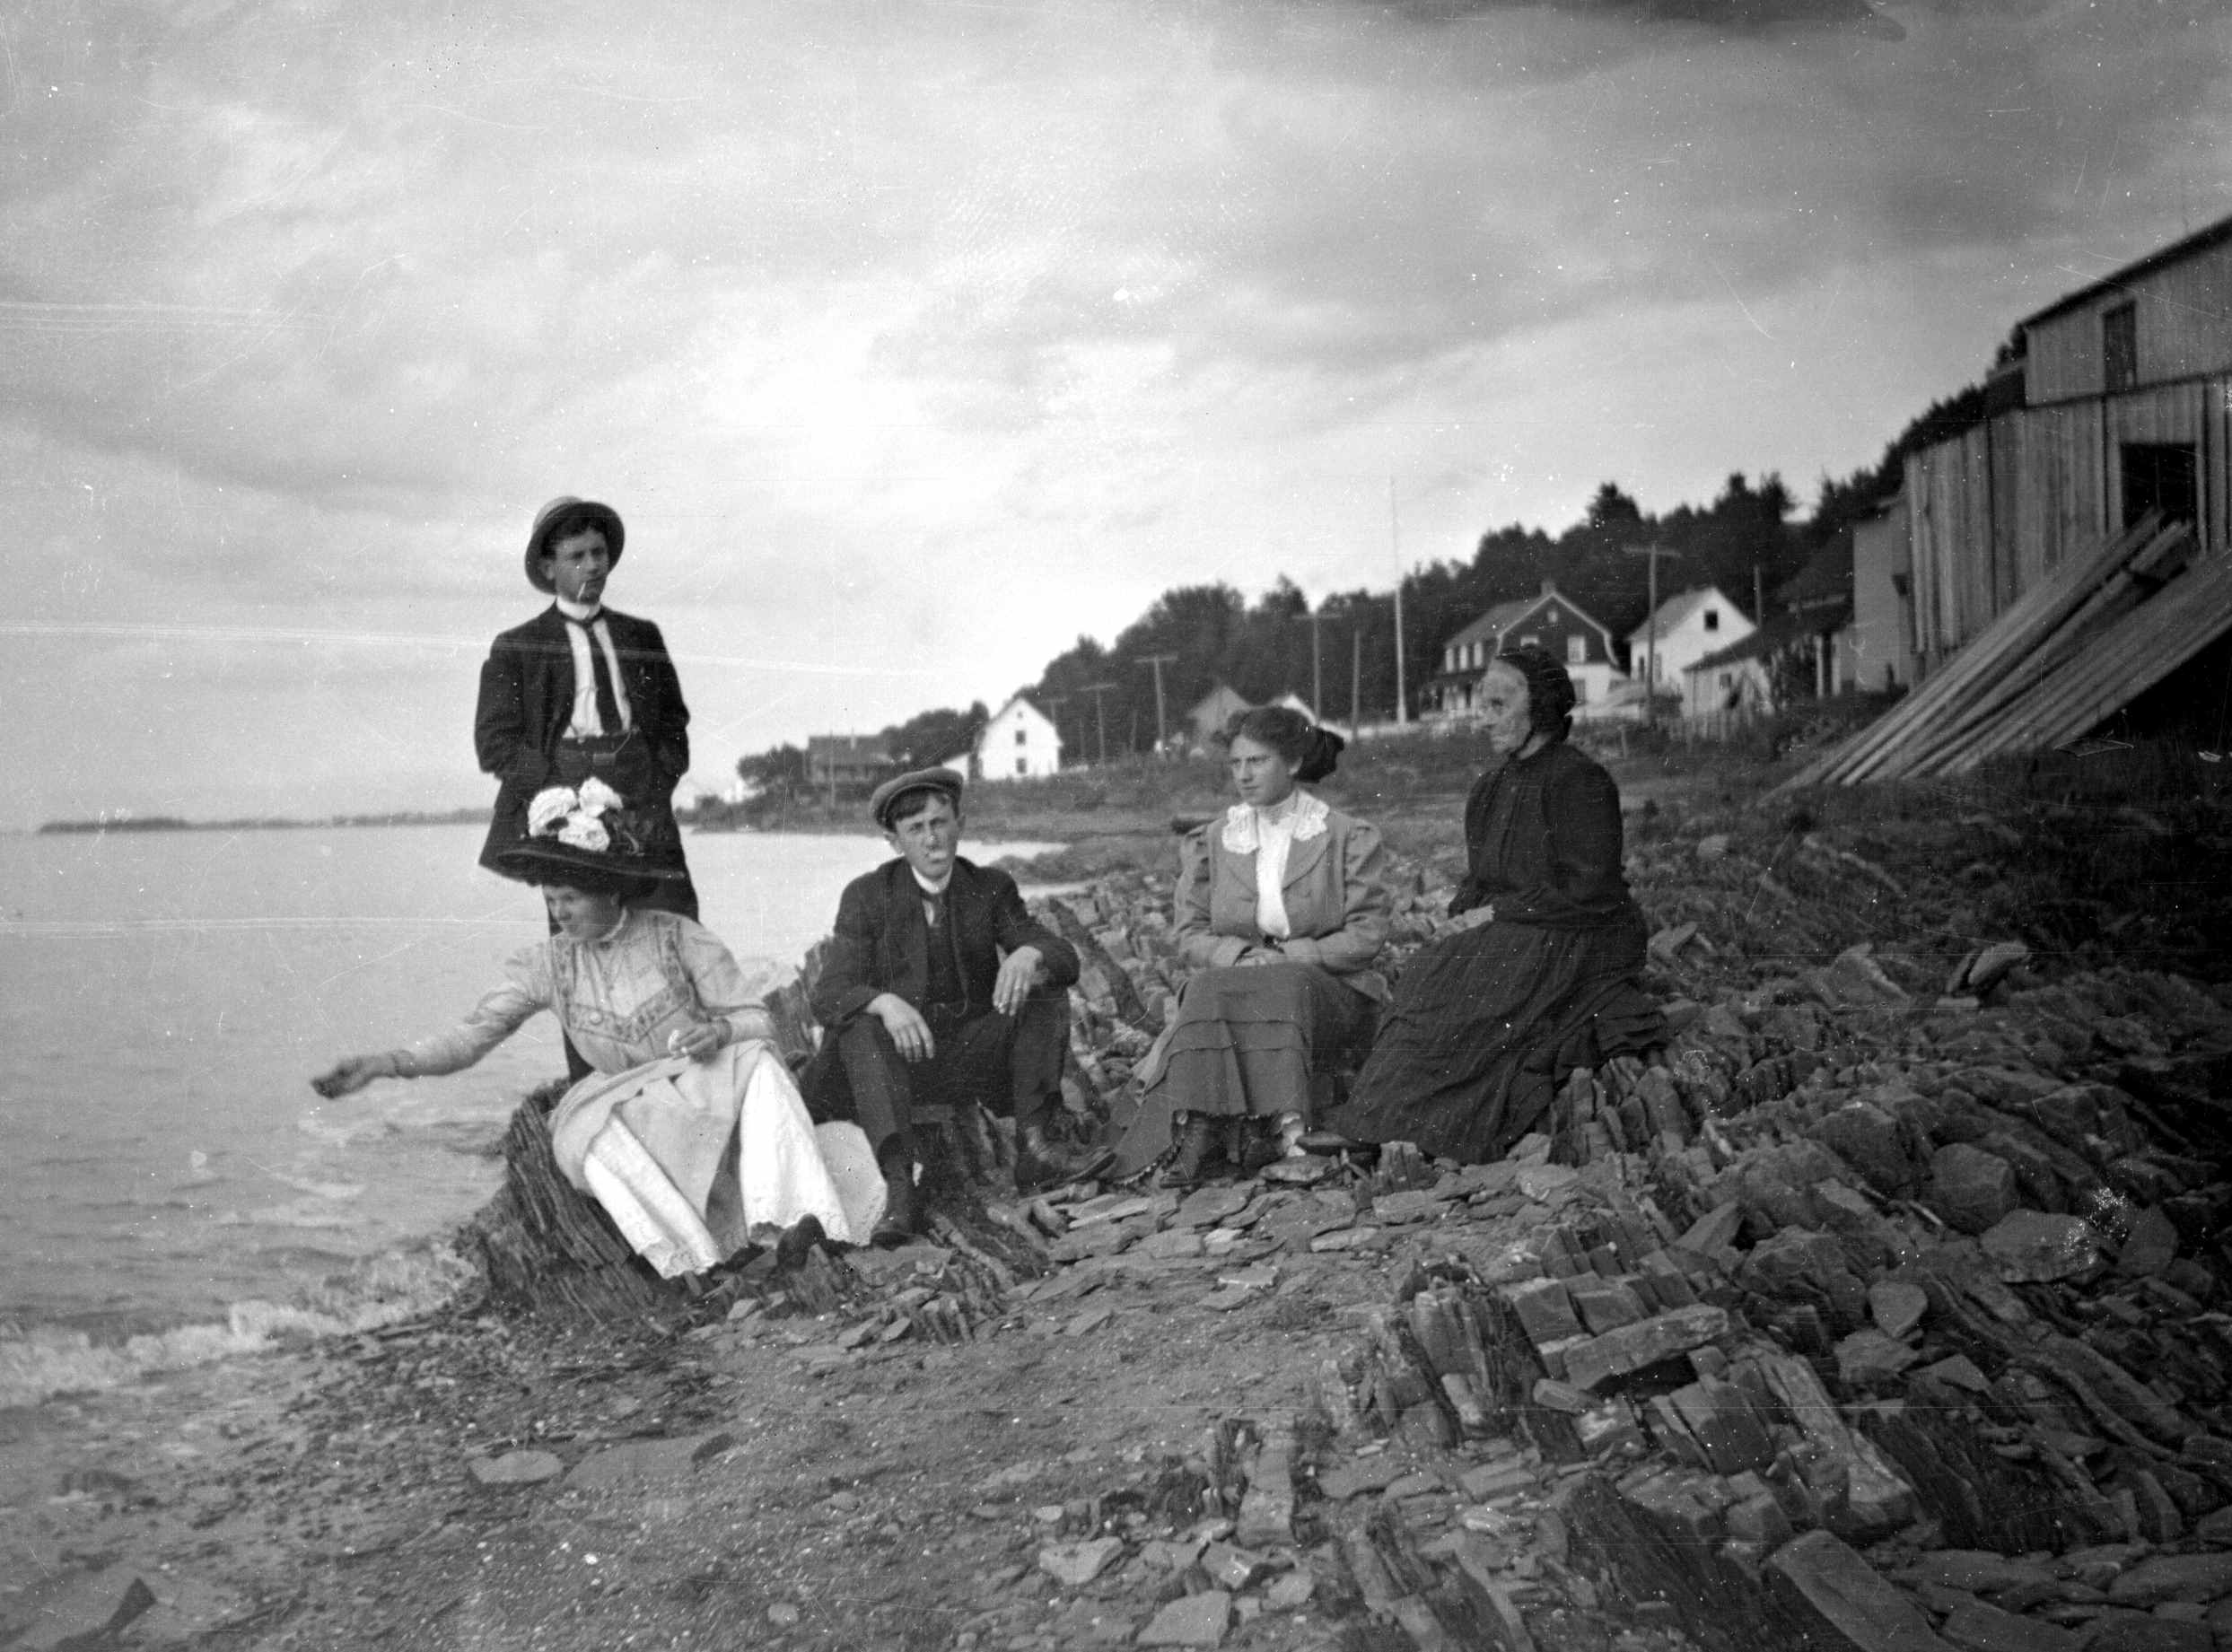 Adults, including an elderly lady, posing on a very rocky beach. One of the women is throwing bread to a bird out of view,